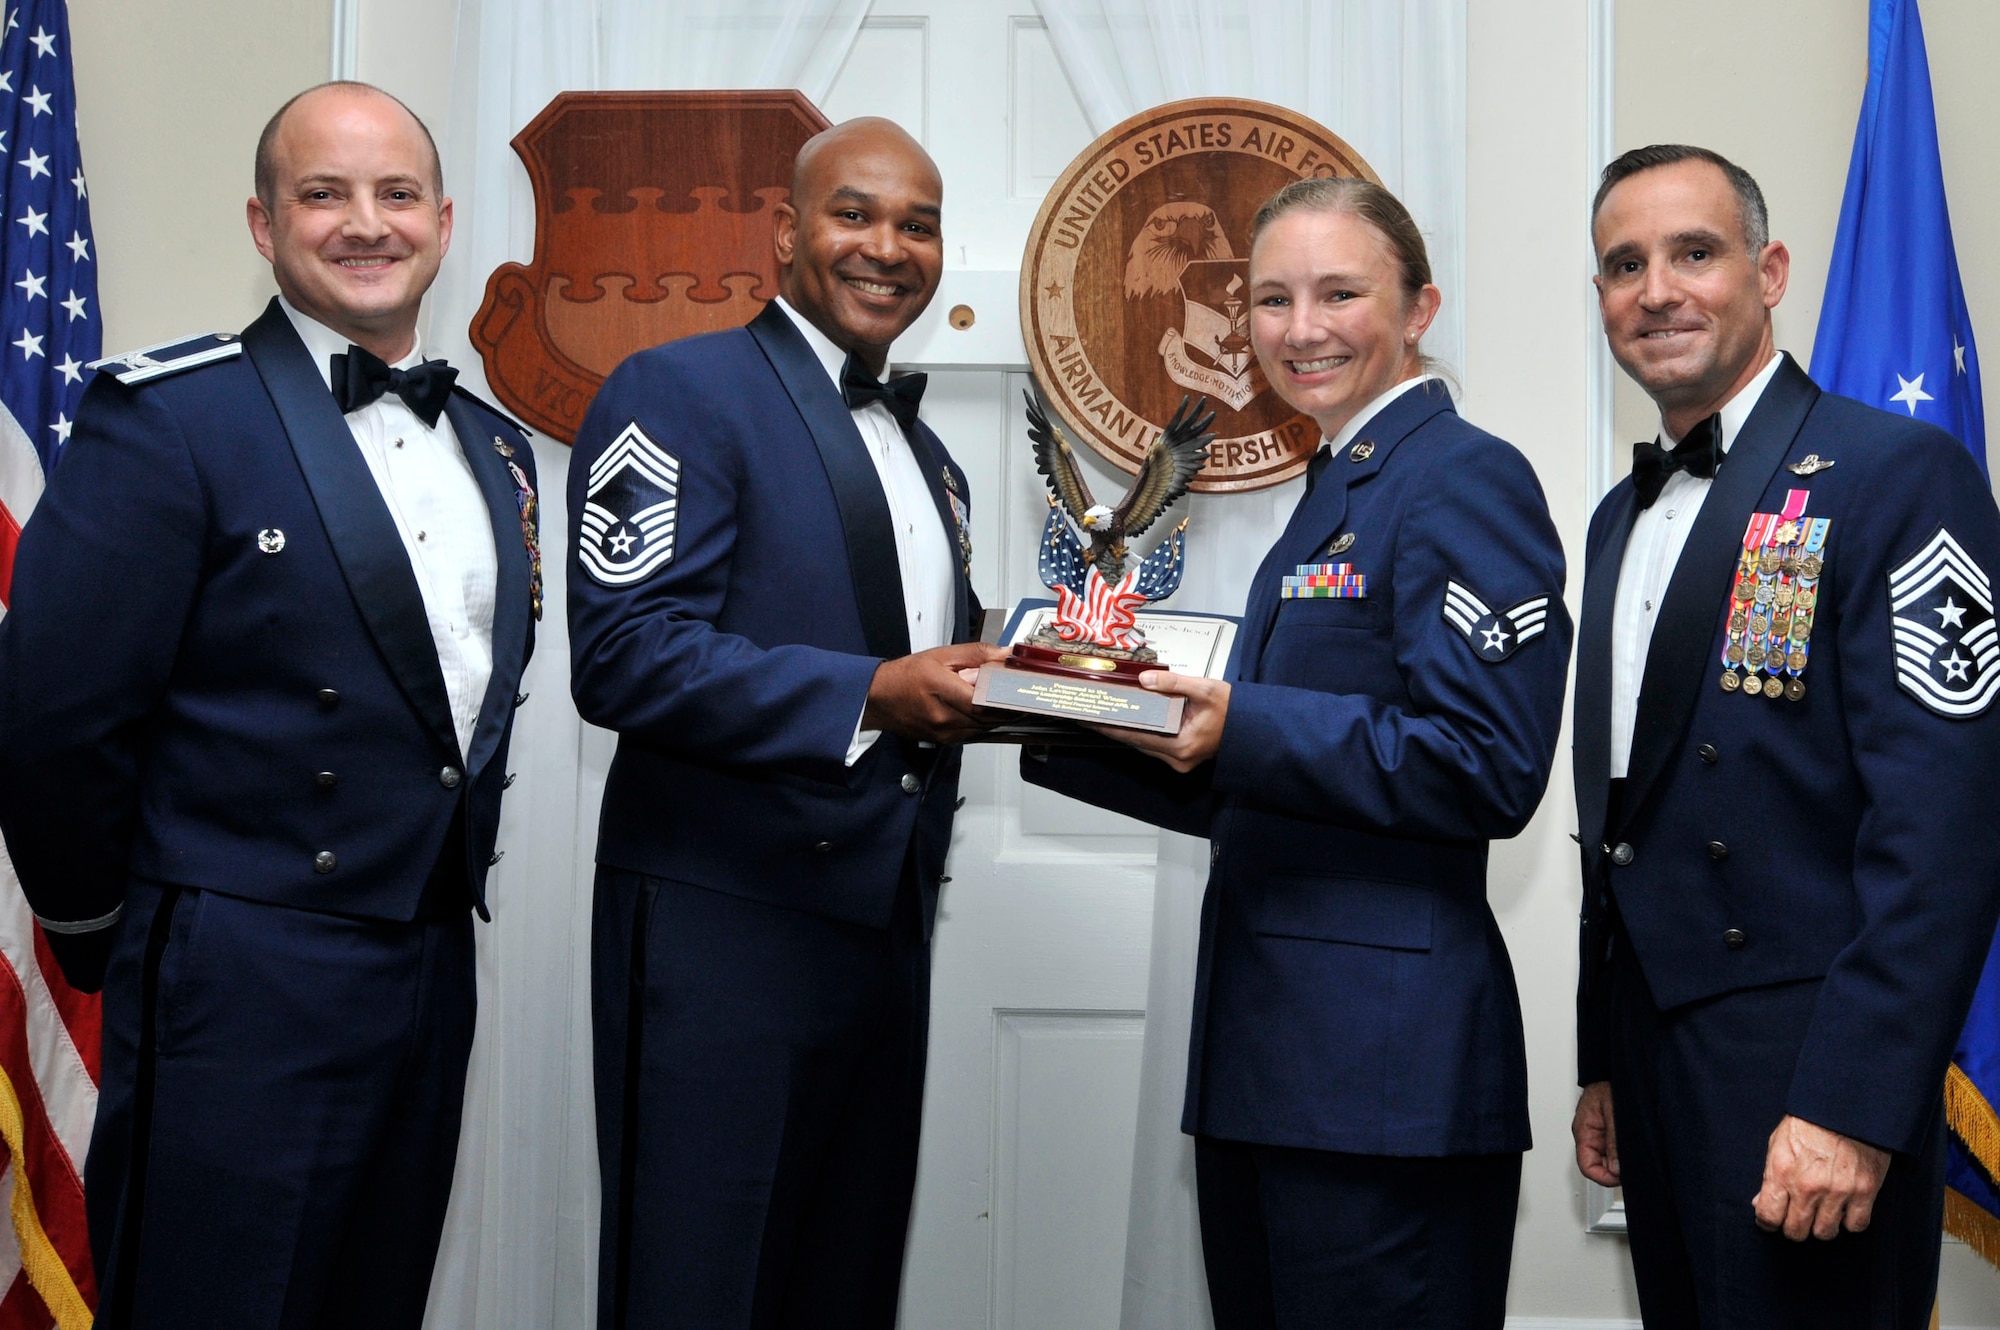 The Levitow Award is given to the graduate with the highest average rating from instructor and student points, and is the highest award in enlisted professional military education.